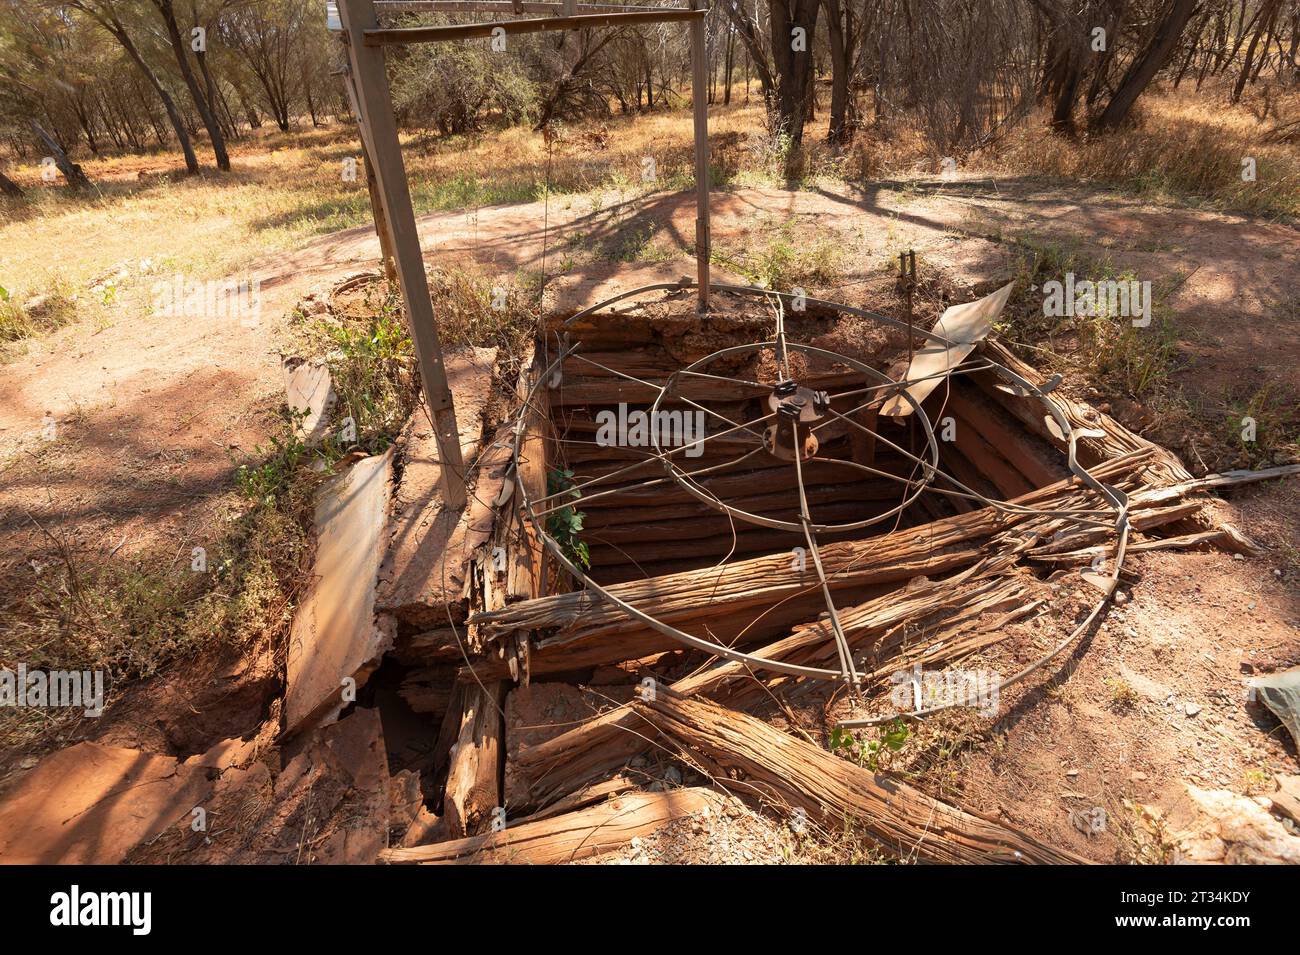 Well One on the Canning Stock Route, Western Australia, Australia Stock Photo